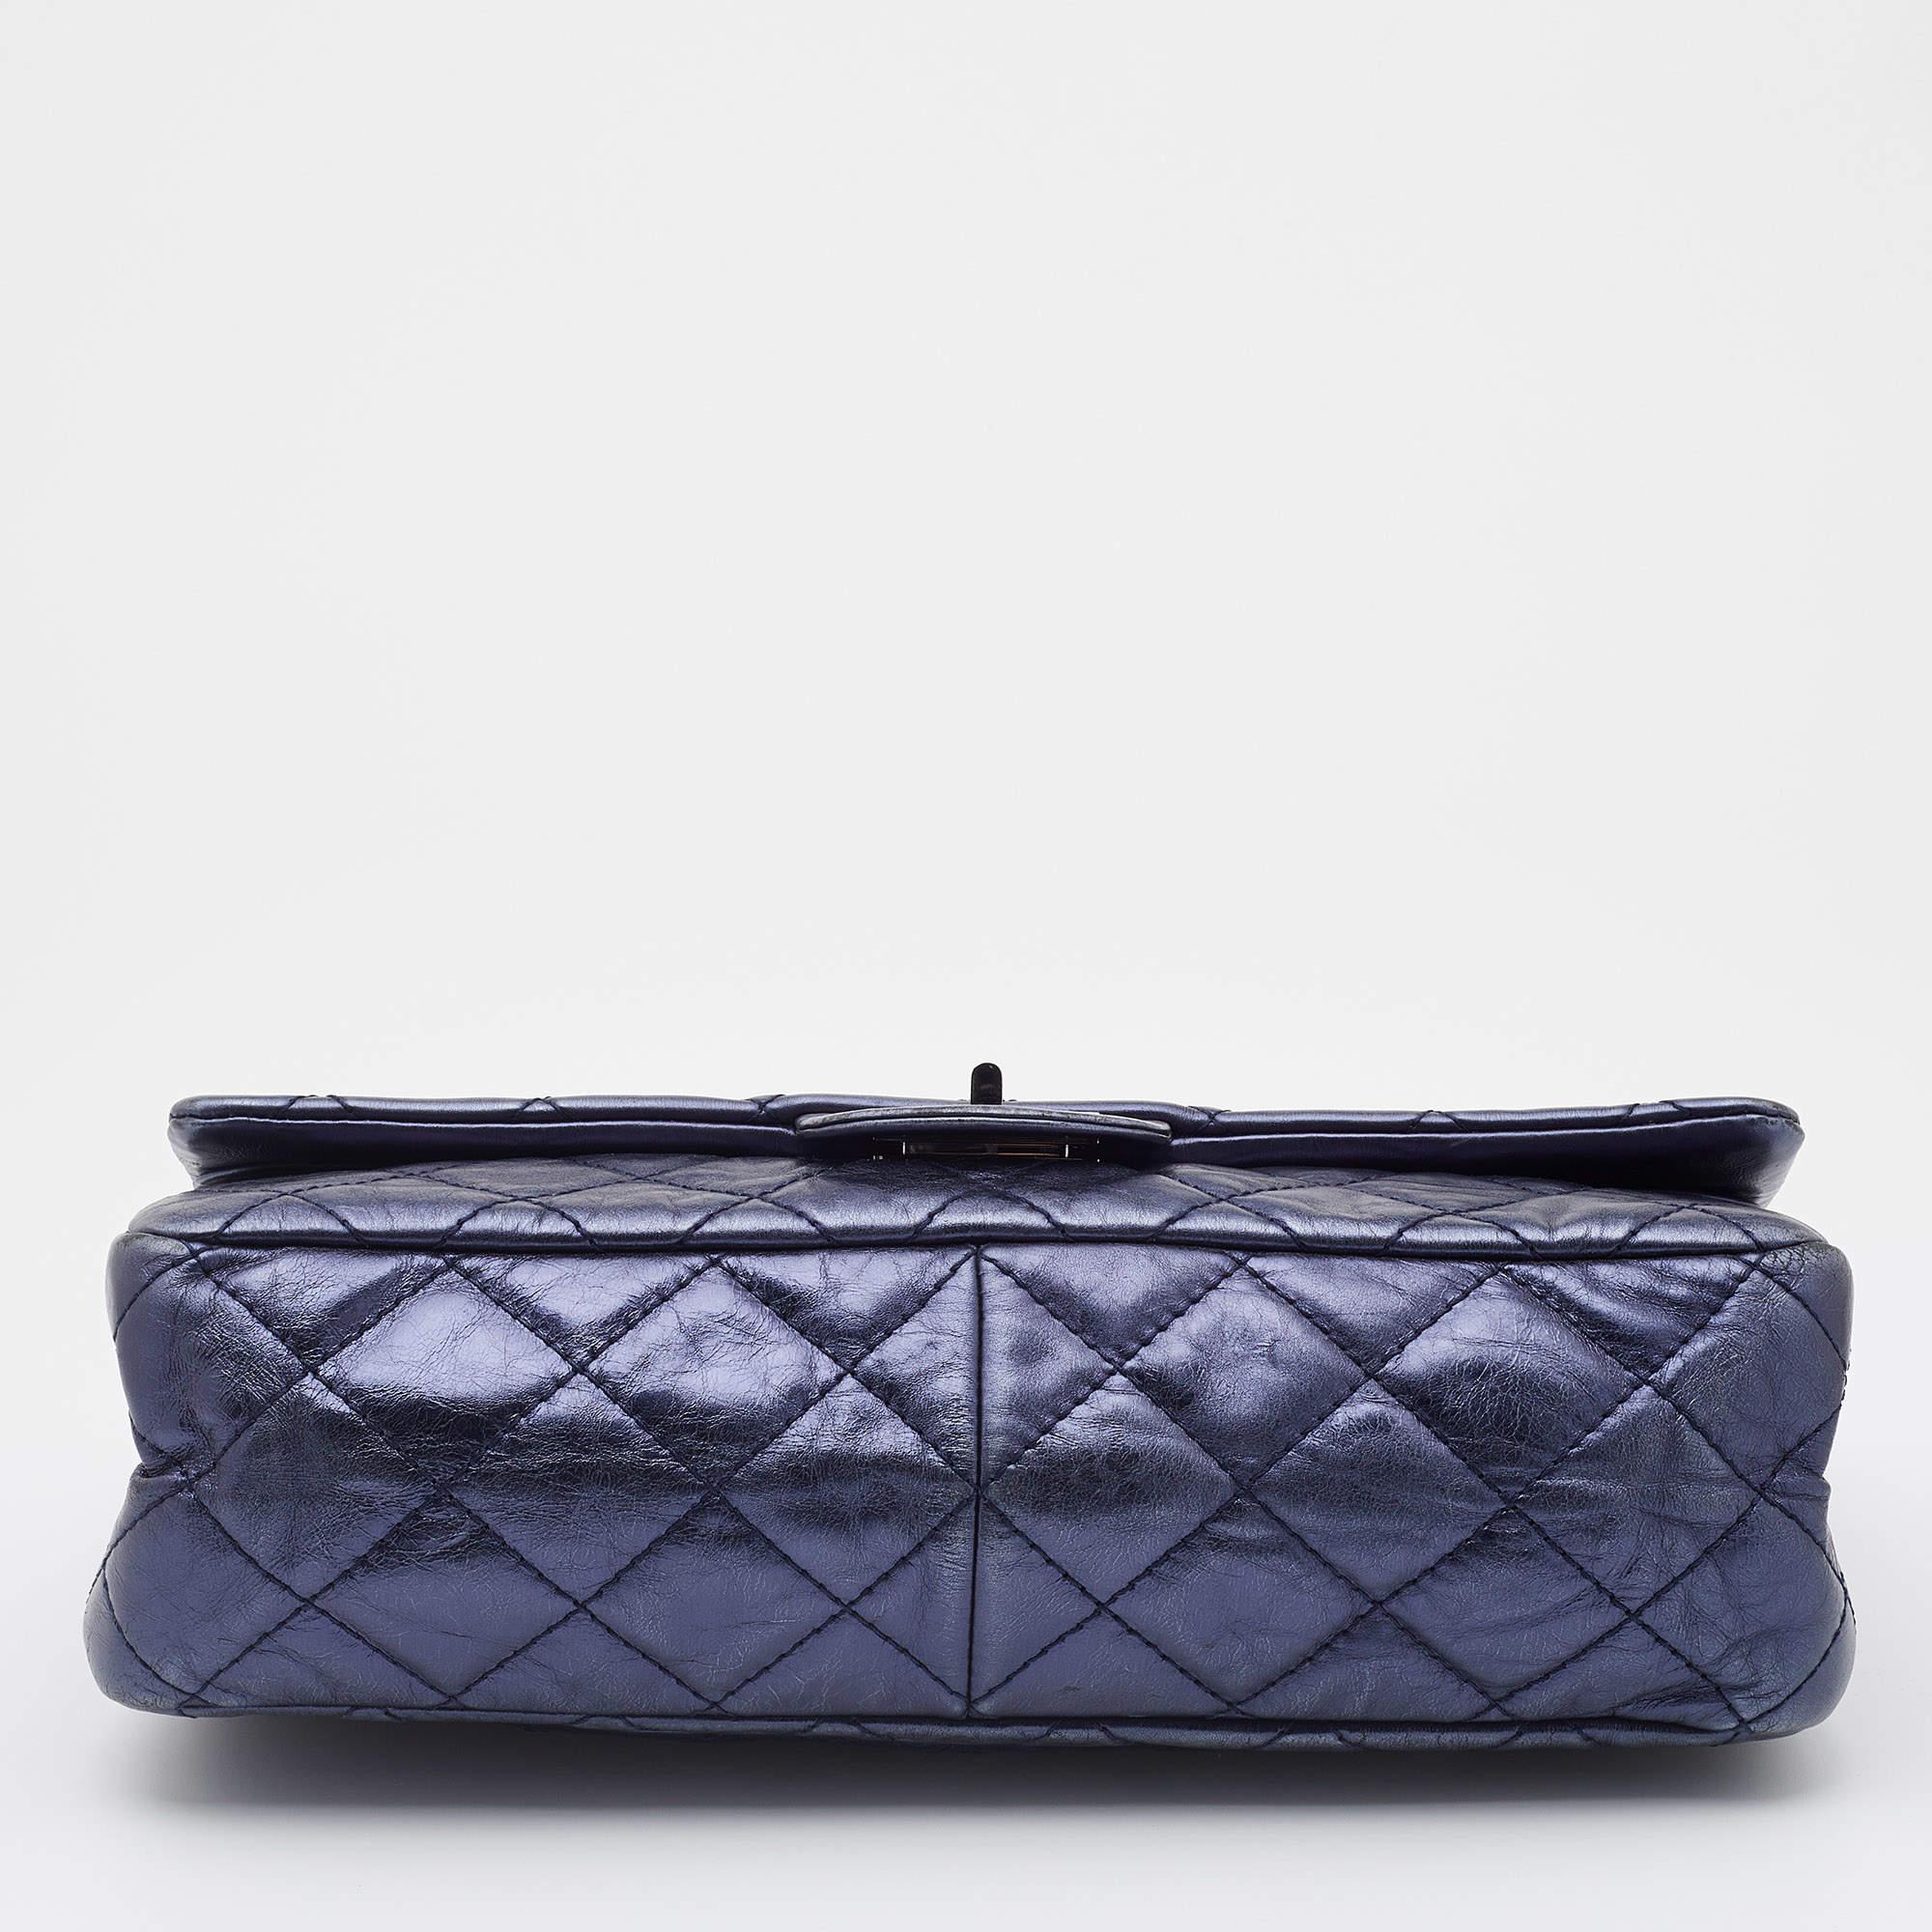 Chanel Blue Quilted Leather Reissue 2.55 Classic 227 Bag In Good Condition In Dubai, Al Qouz 2